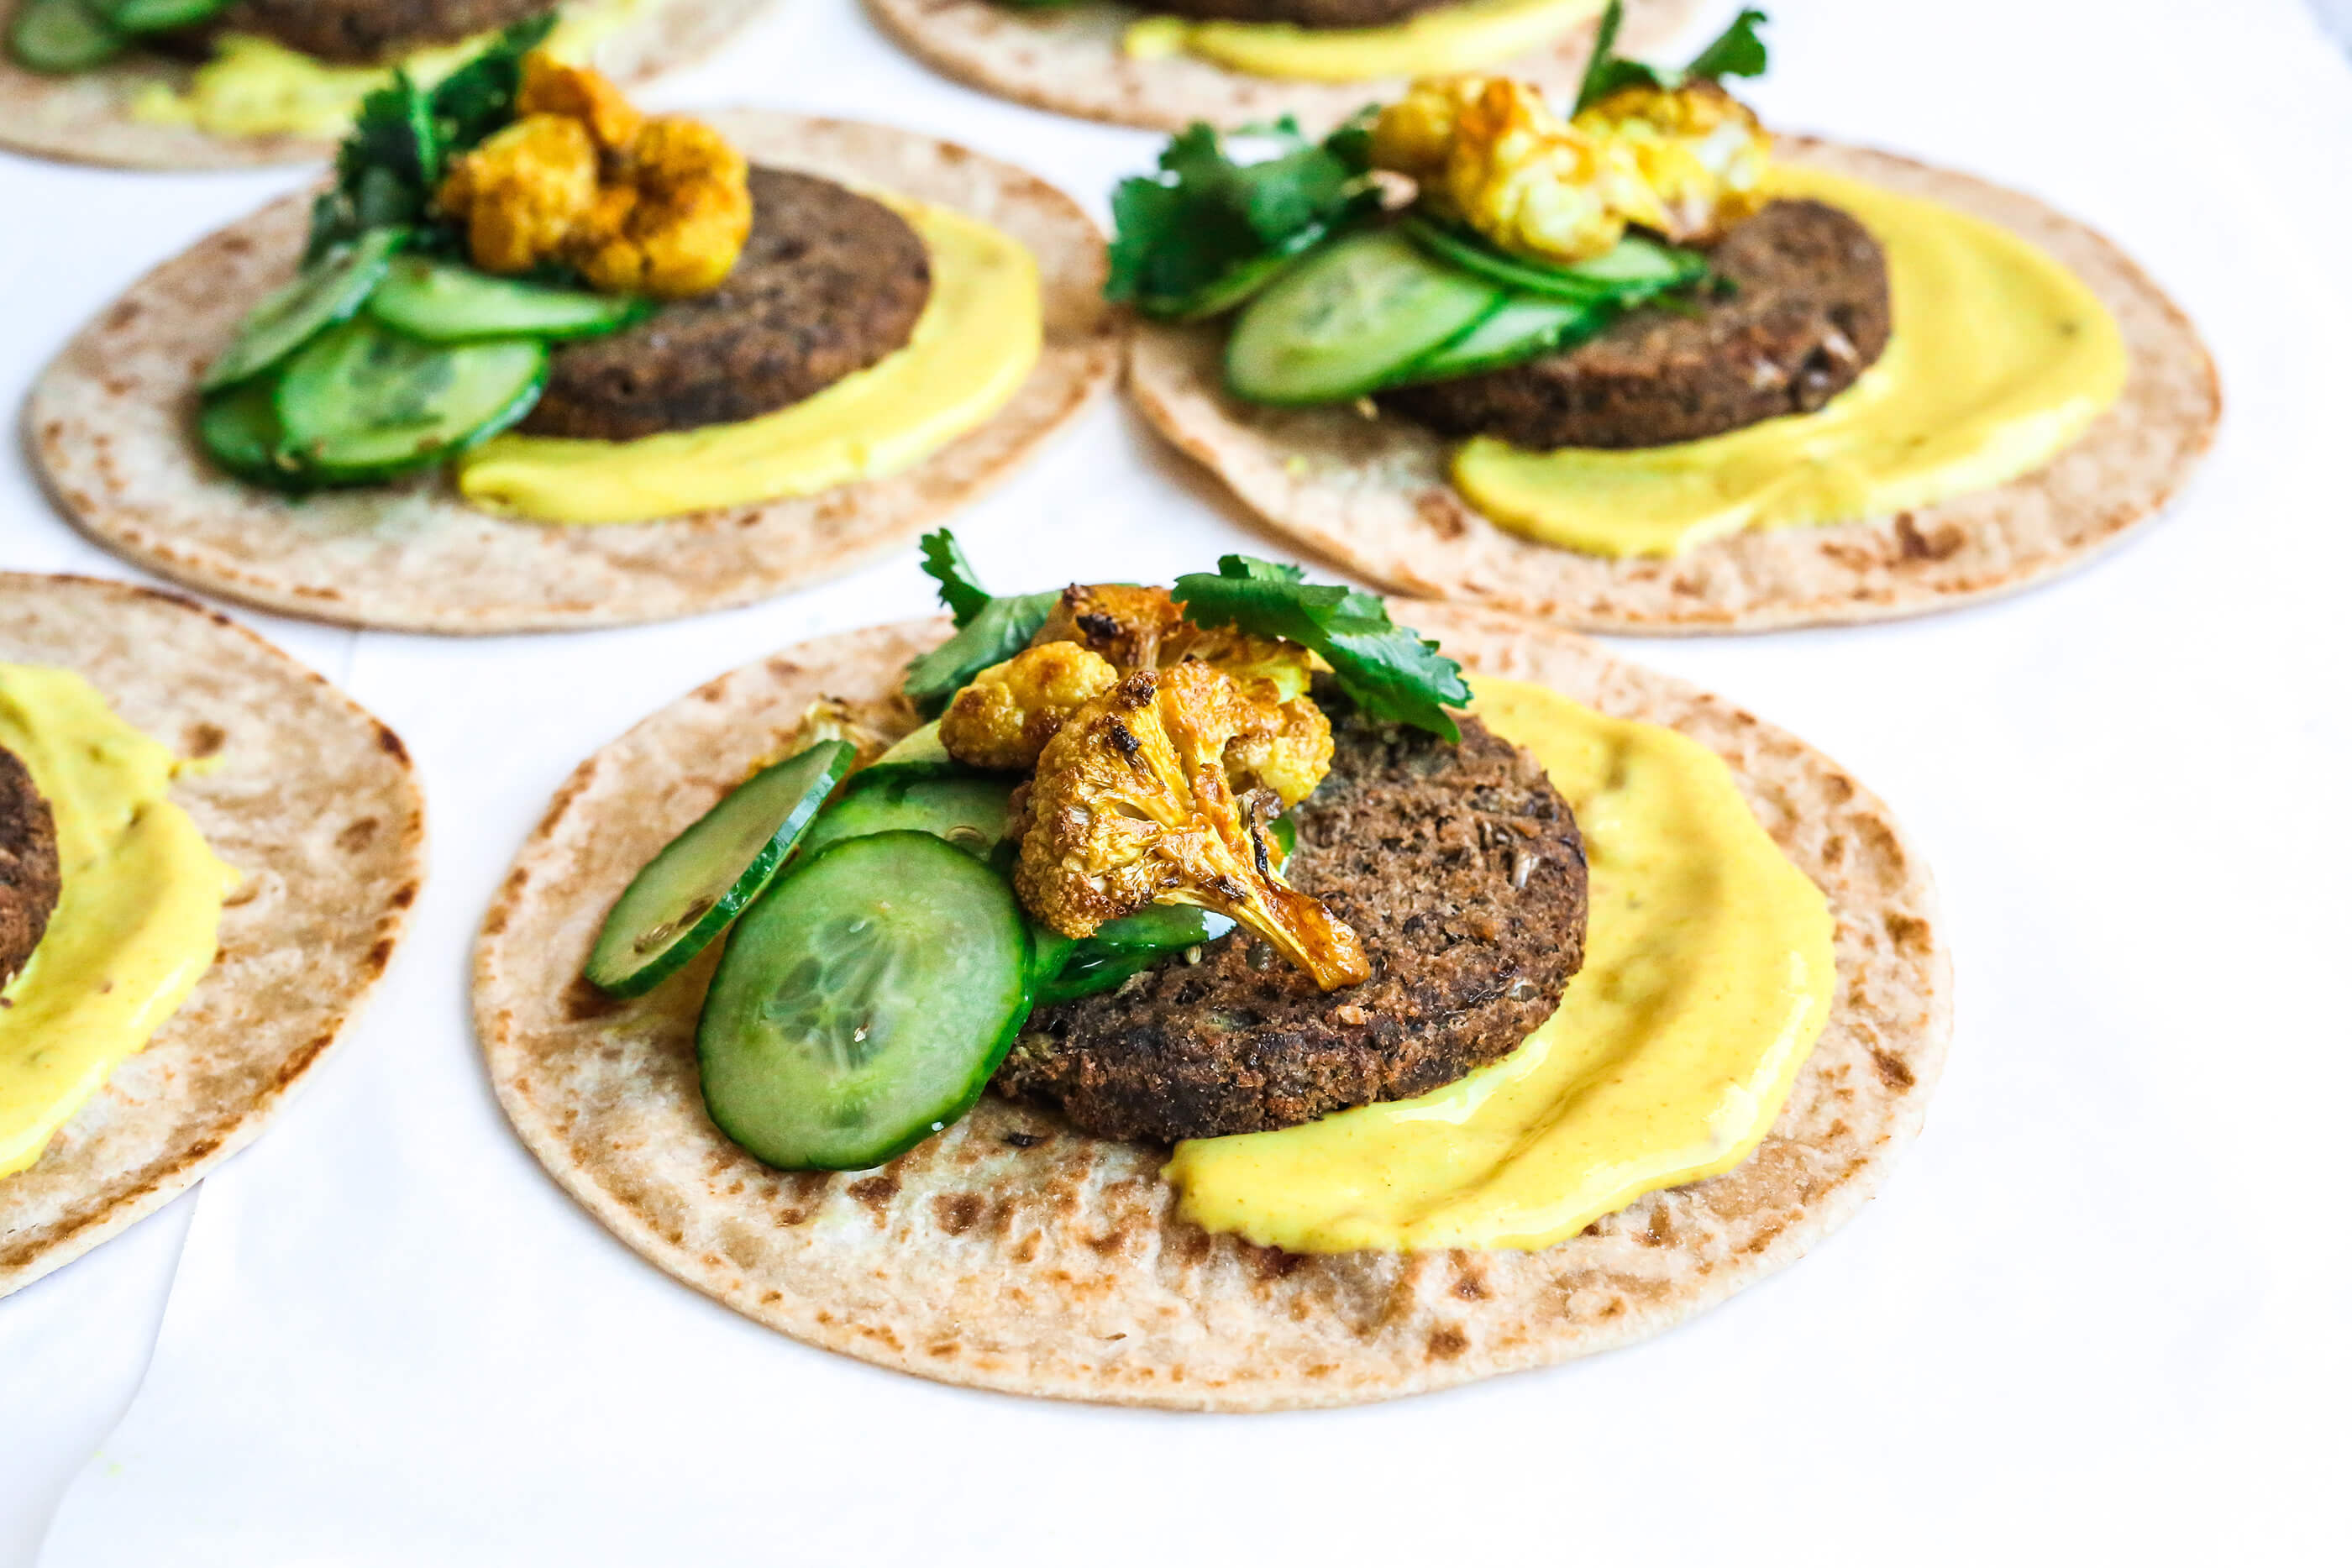 Roti wraps with lentil patties and cucumber fennel salad